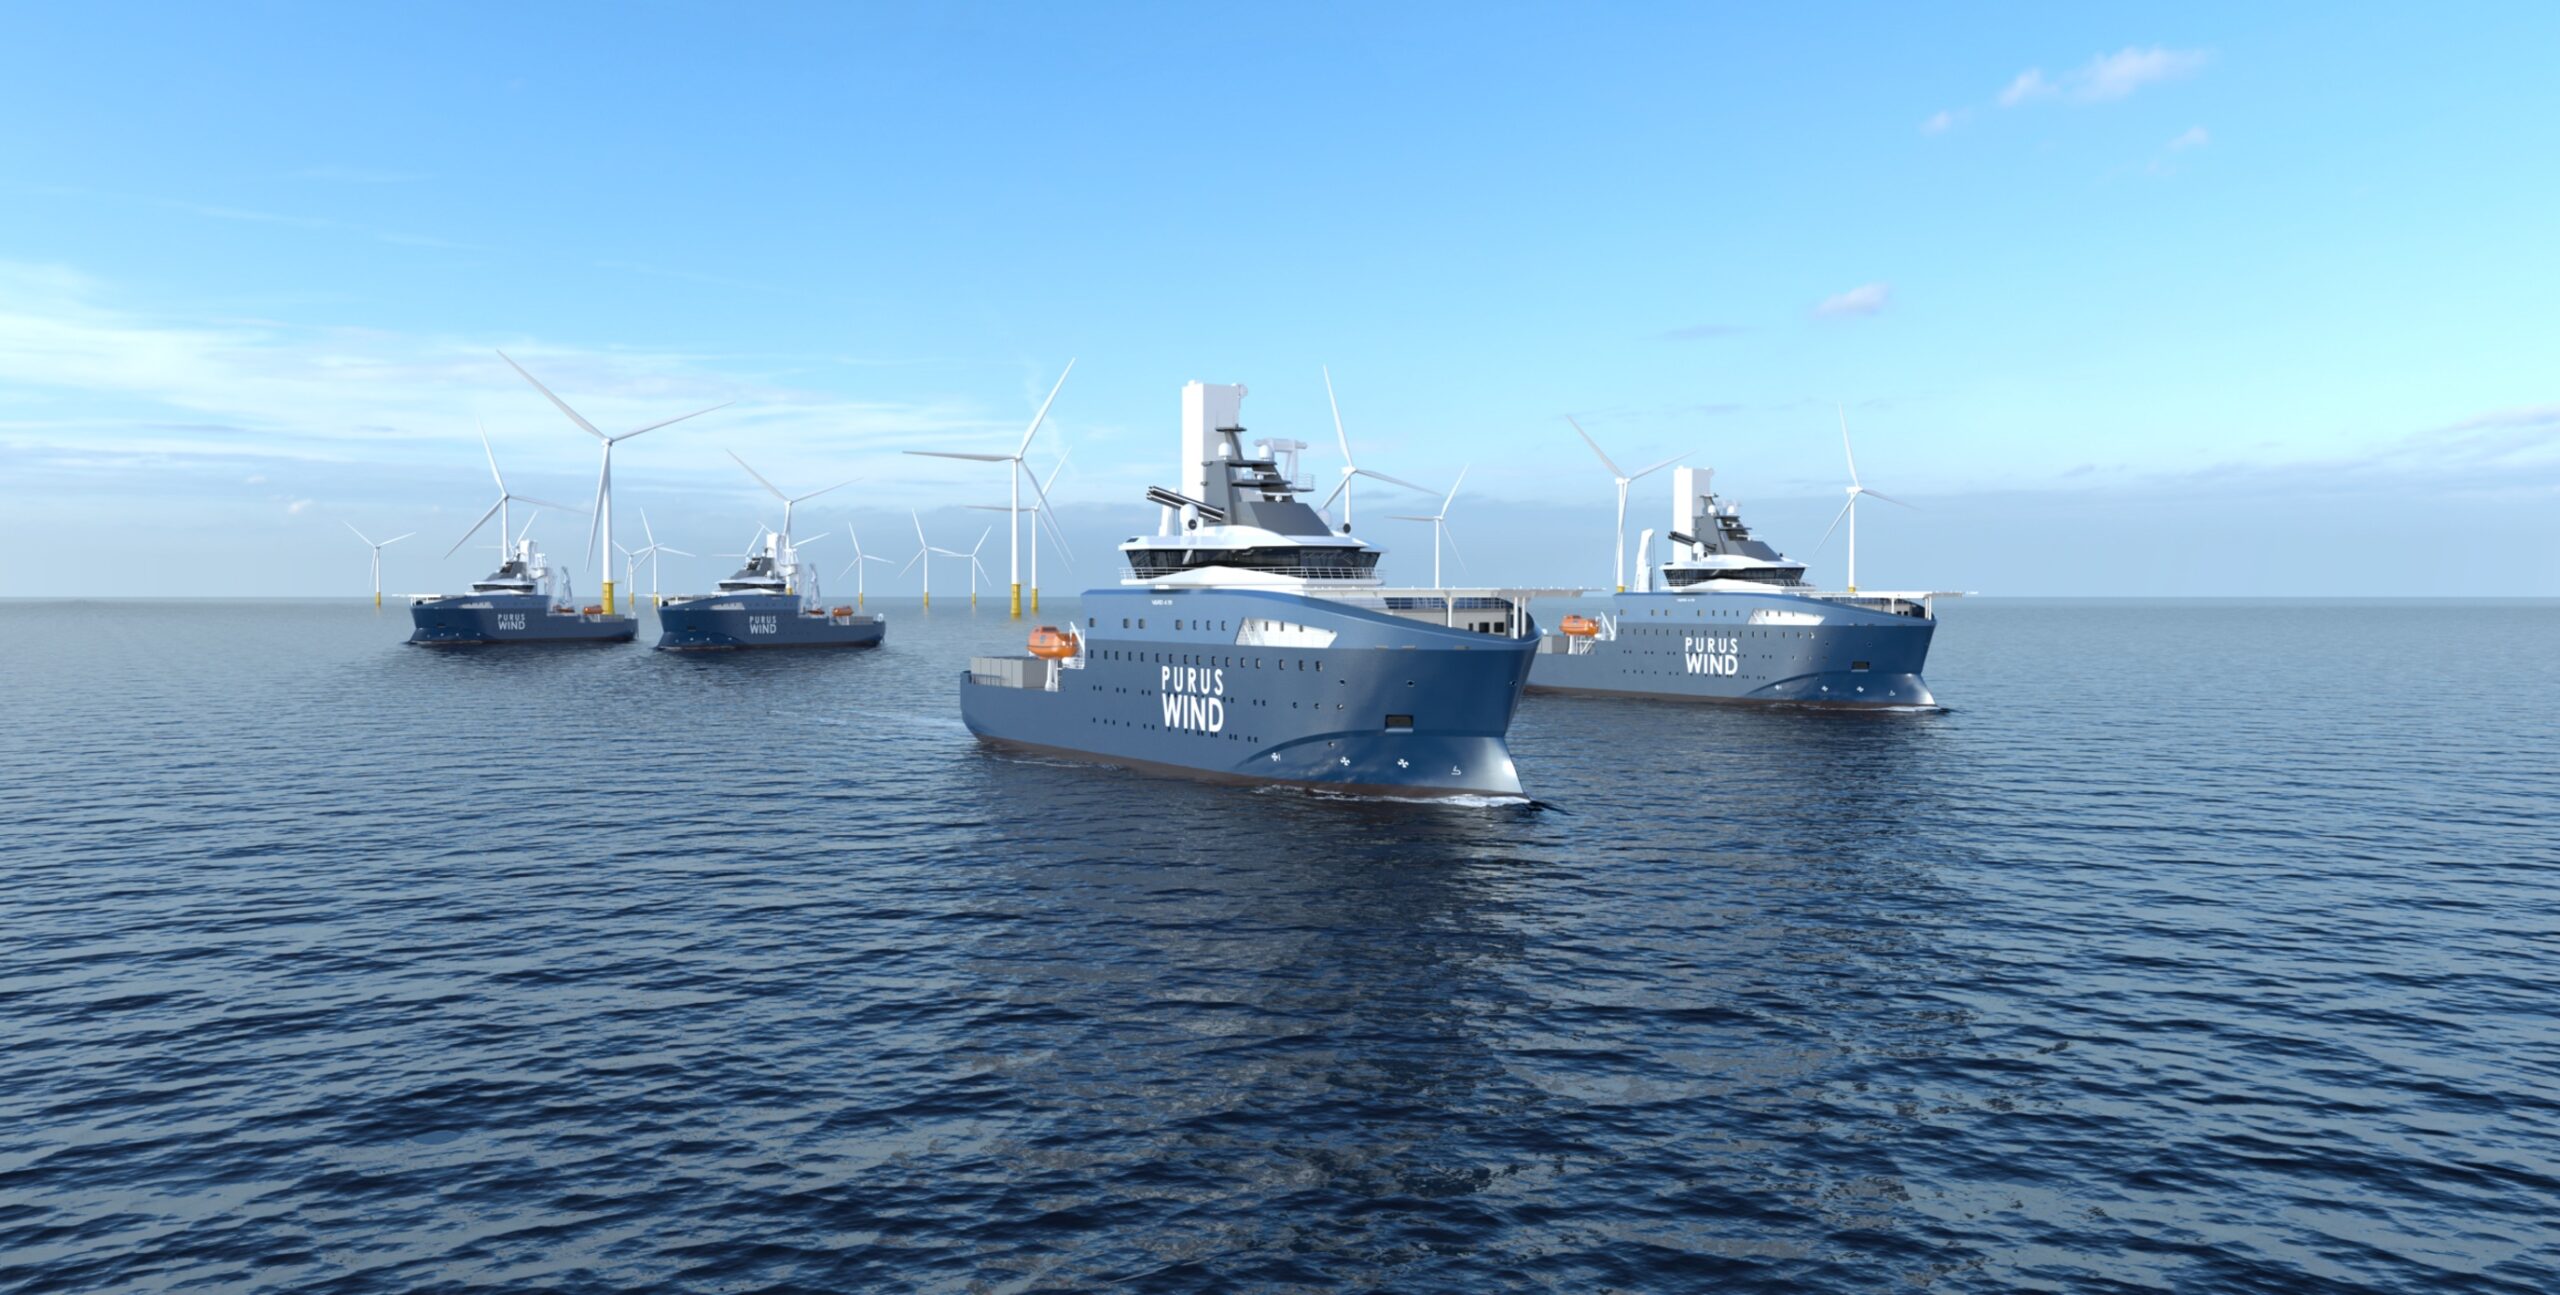 Vard to Build Up to Four Hybrid CSOV’s for Purus Wind